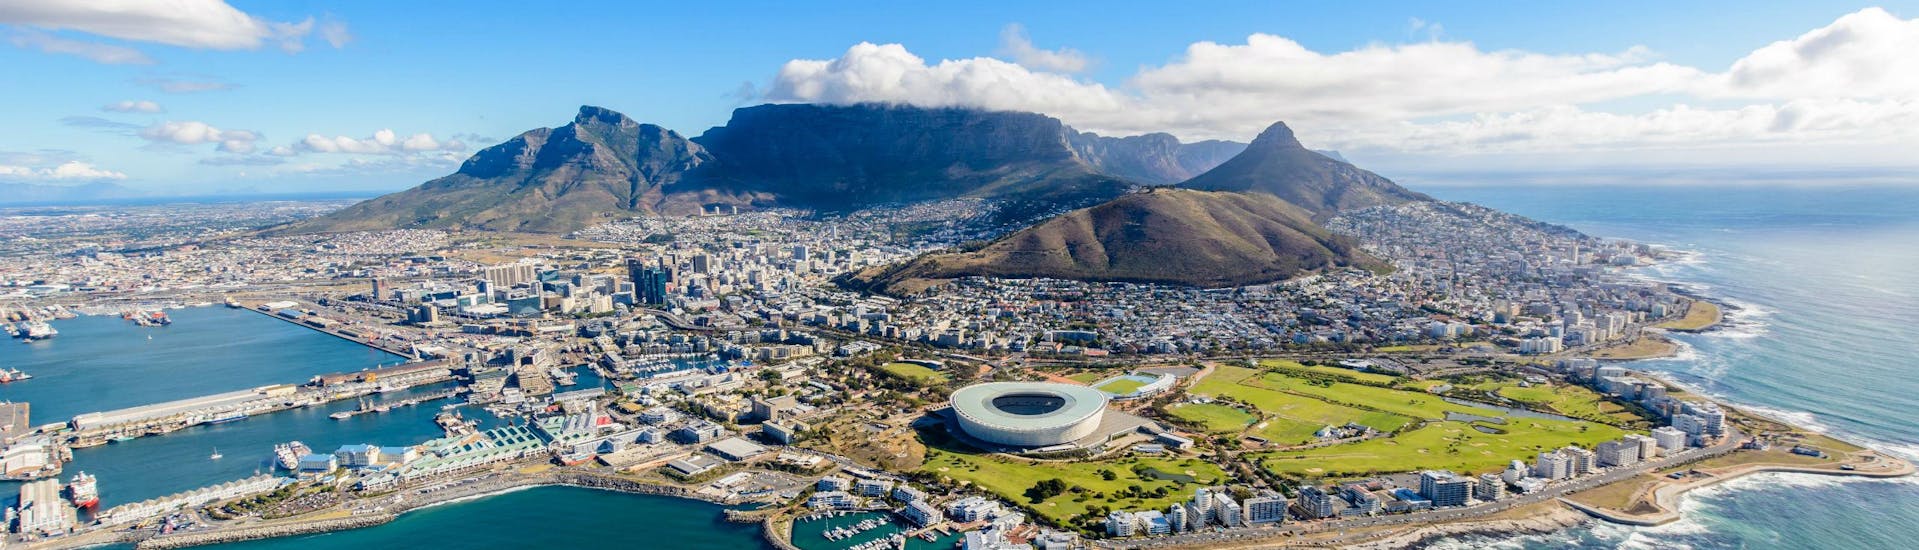 An aereal view of Cape Town, where visitors can go paragliding from Signal Hill.